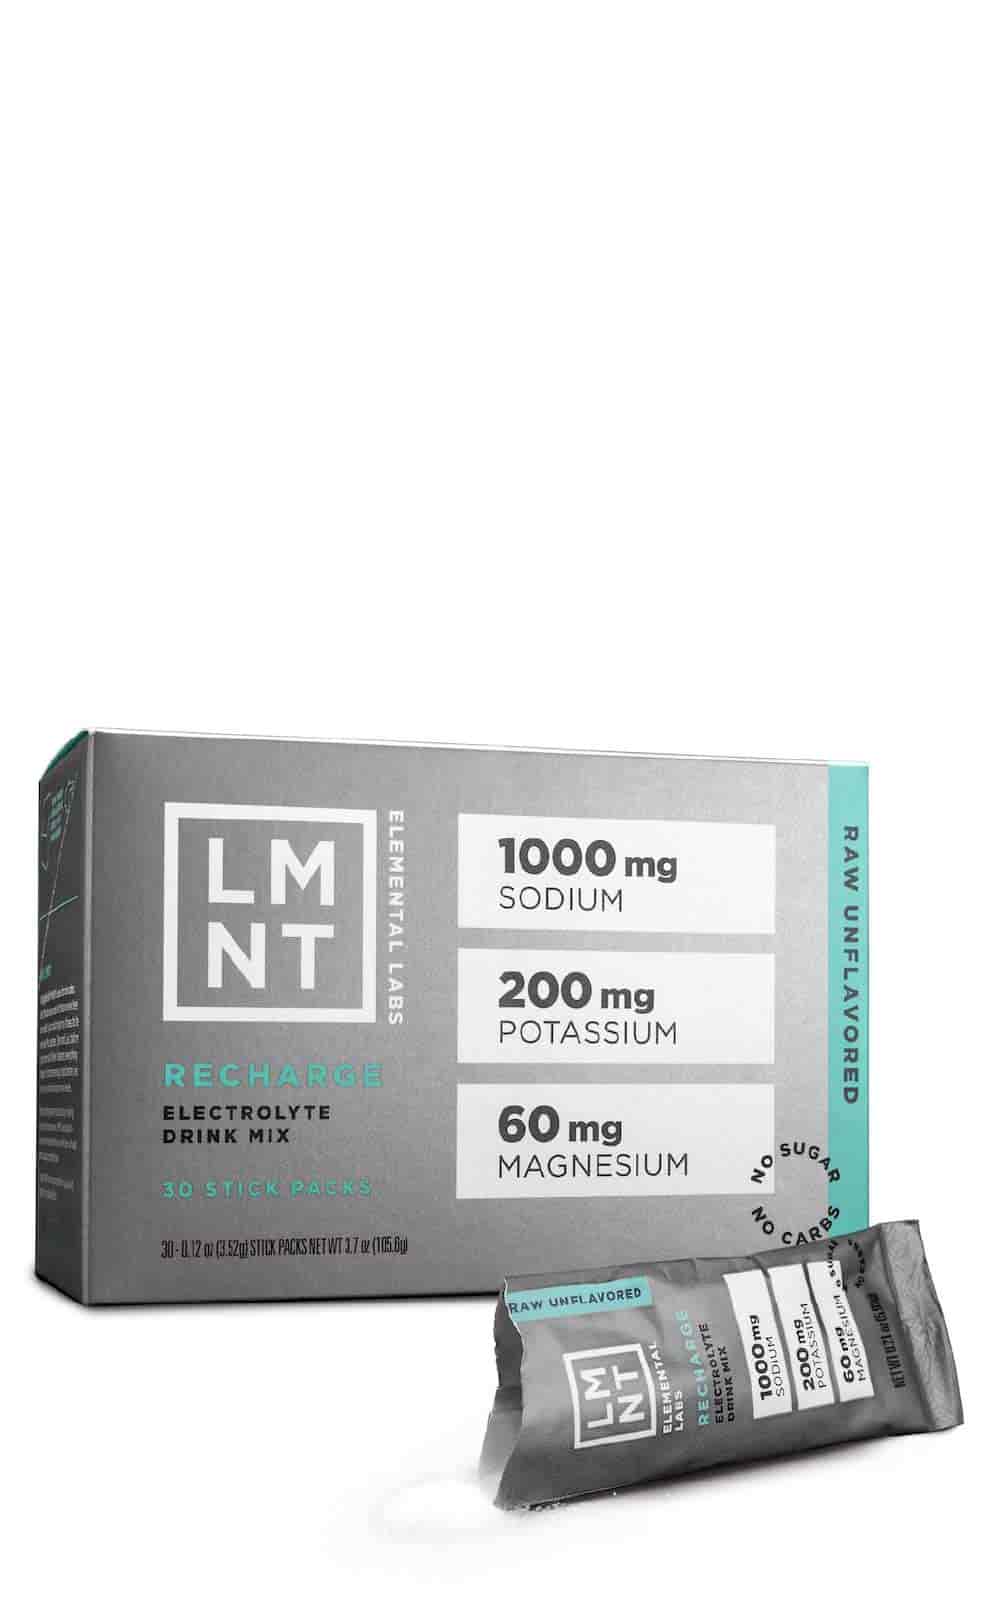 Buy LMNT Recharge Electrolyte Drink Mix Raw Unflavored at LiveHelfi